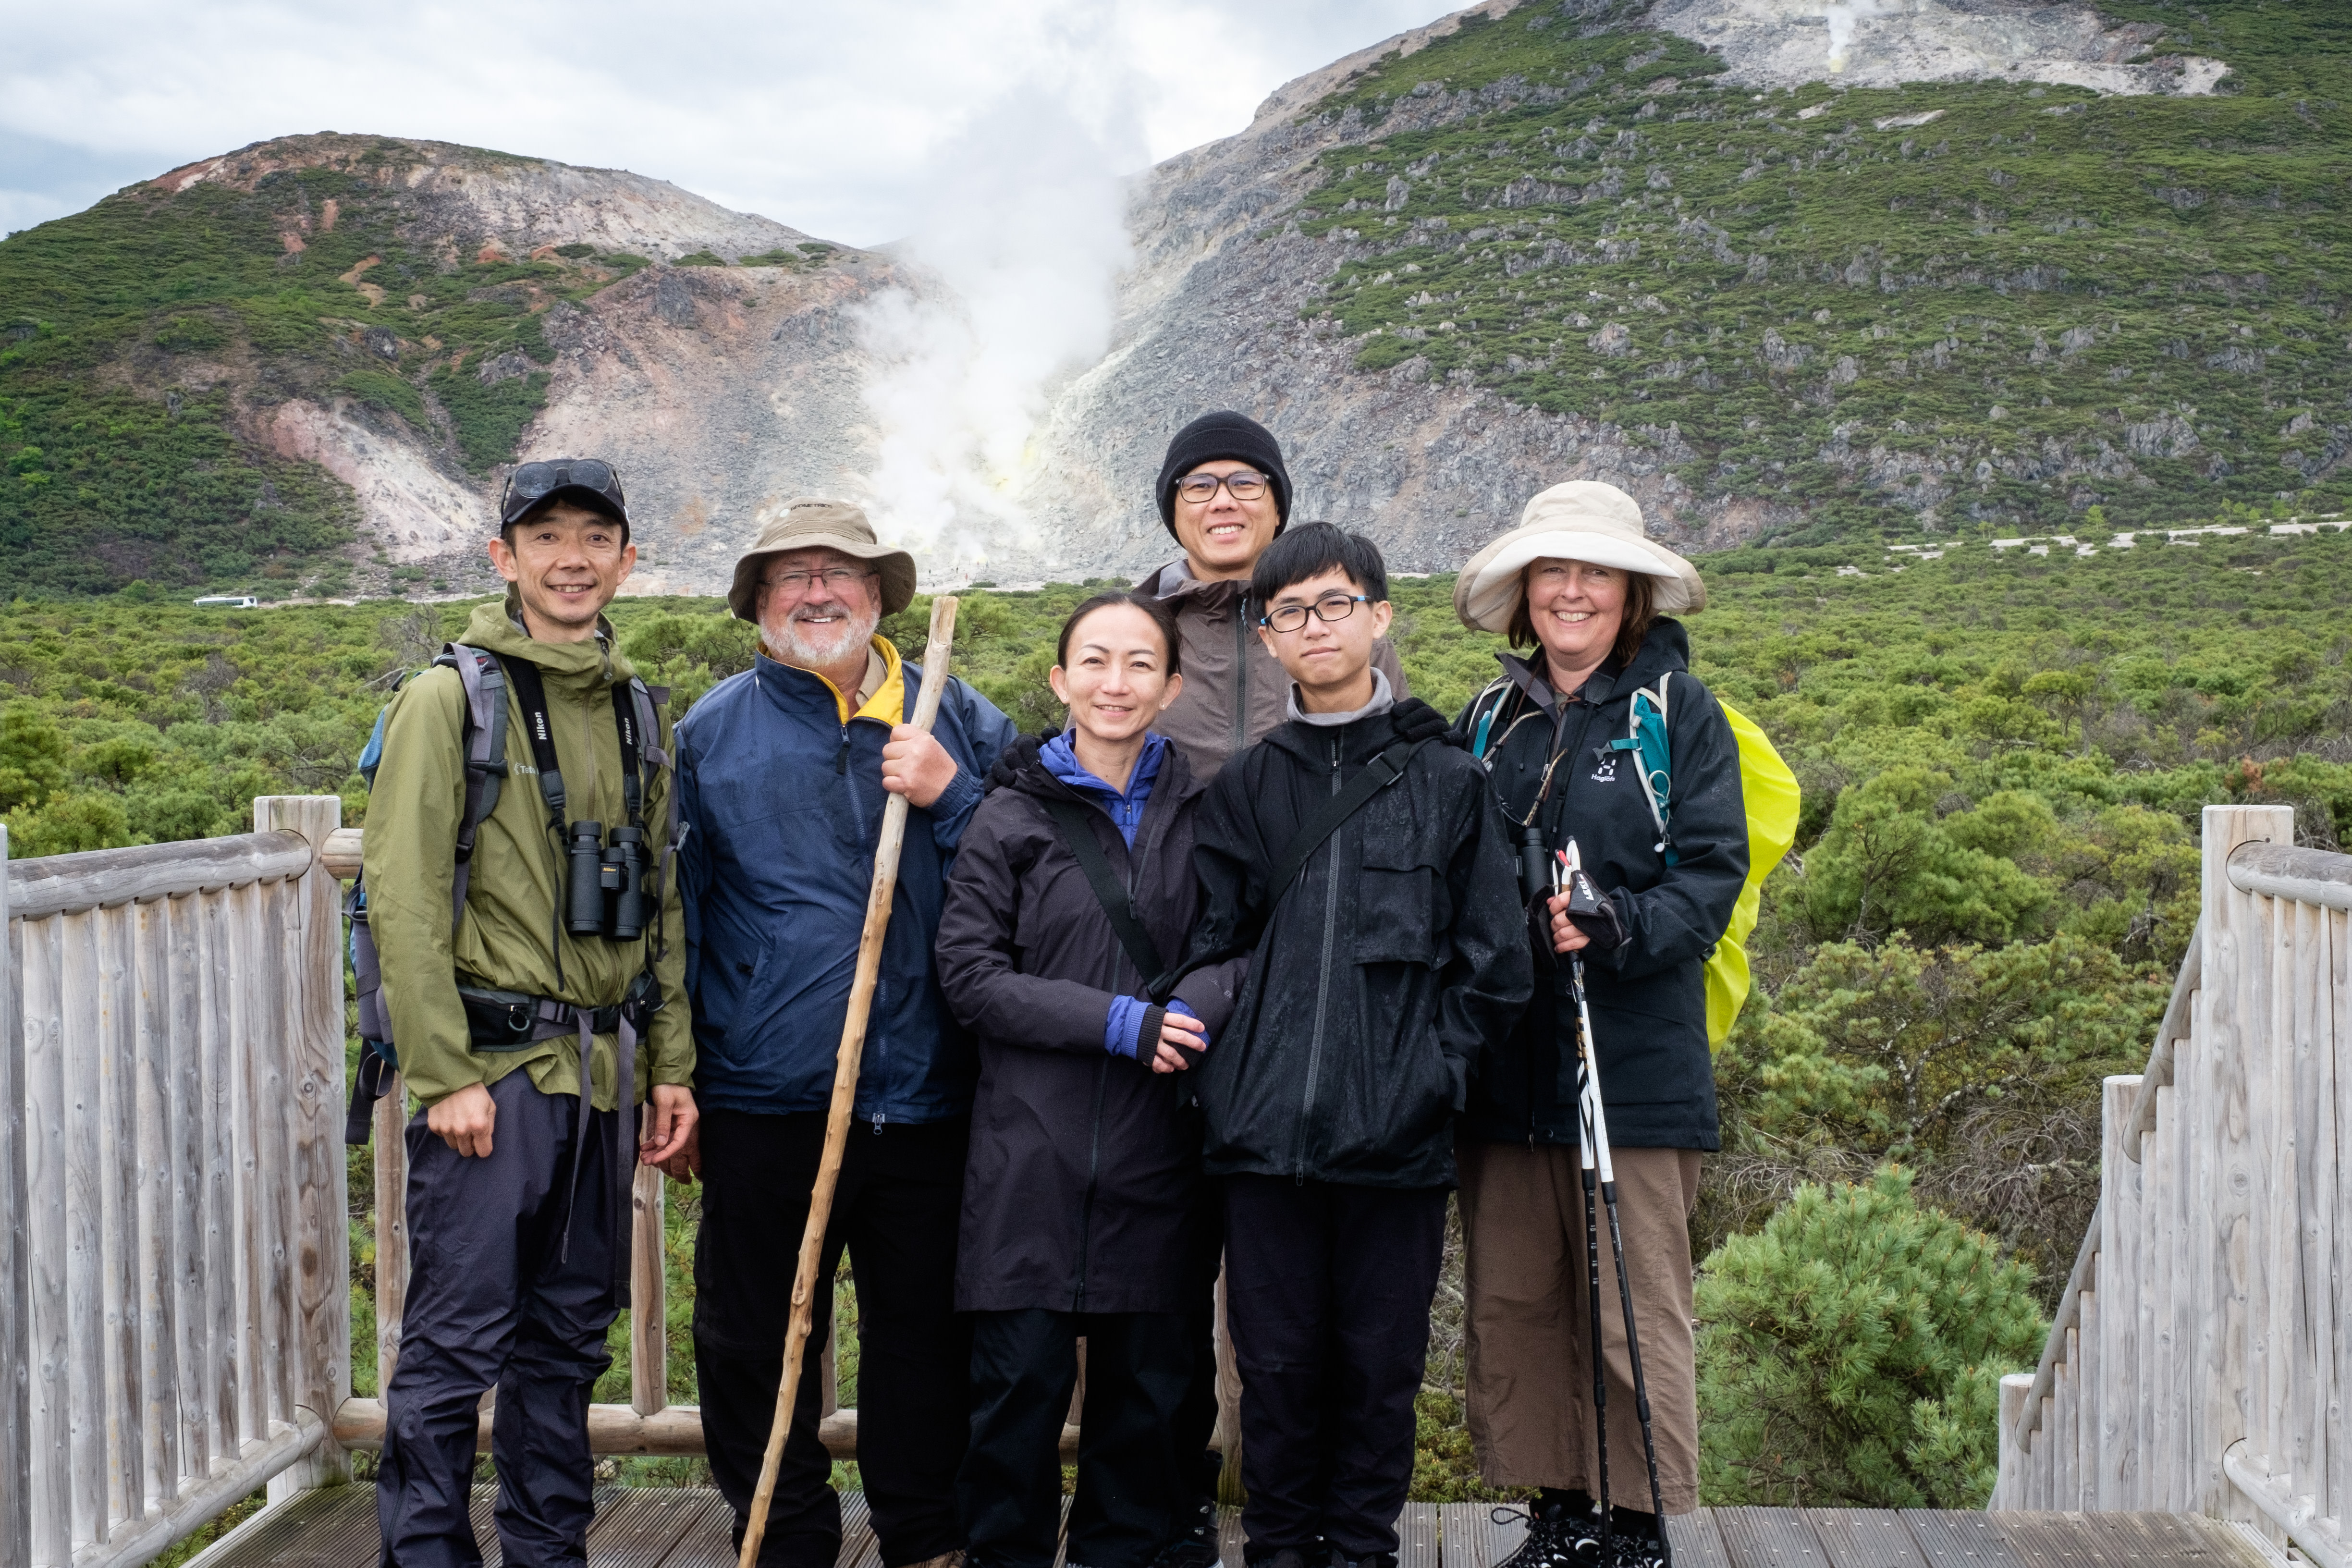 A group of walkers pose in front of Mt Io. In the background the sulphuric steam can be seen rising from an exposed patch of land.